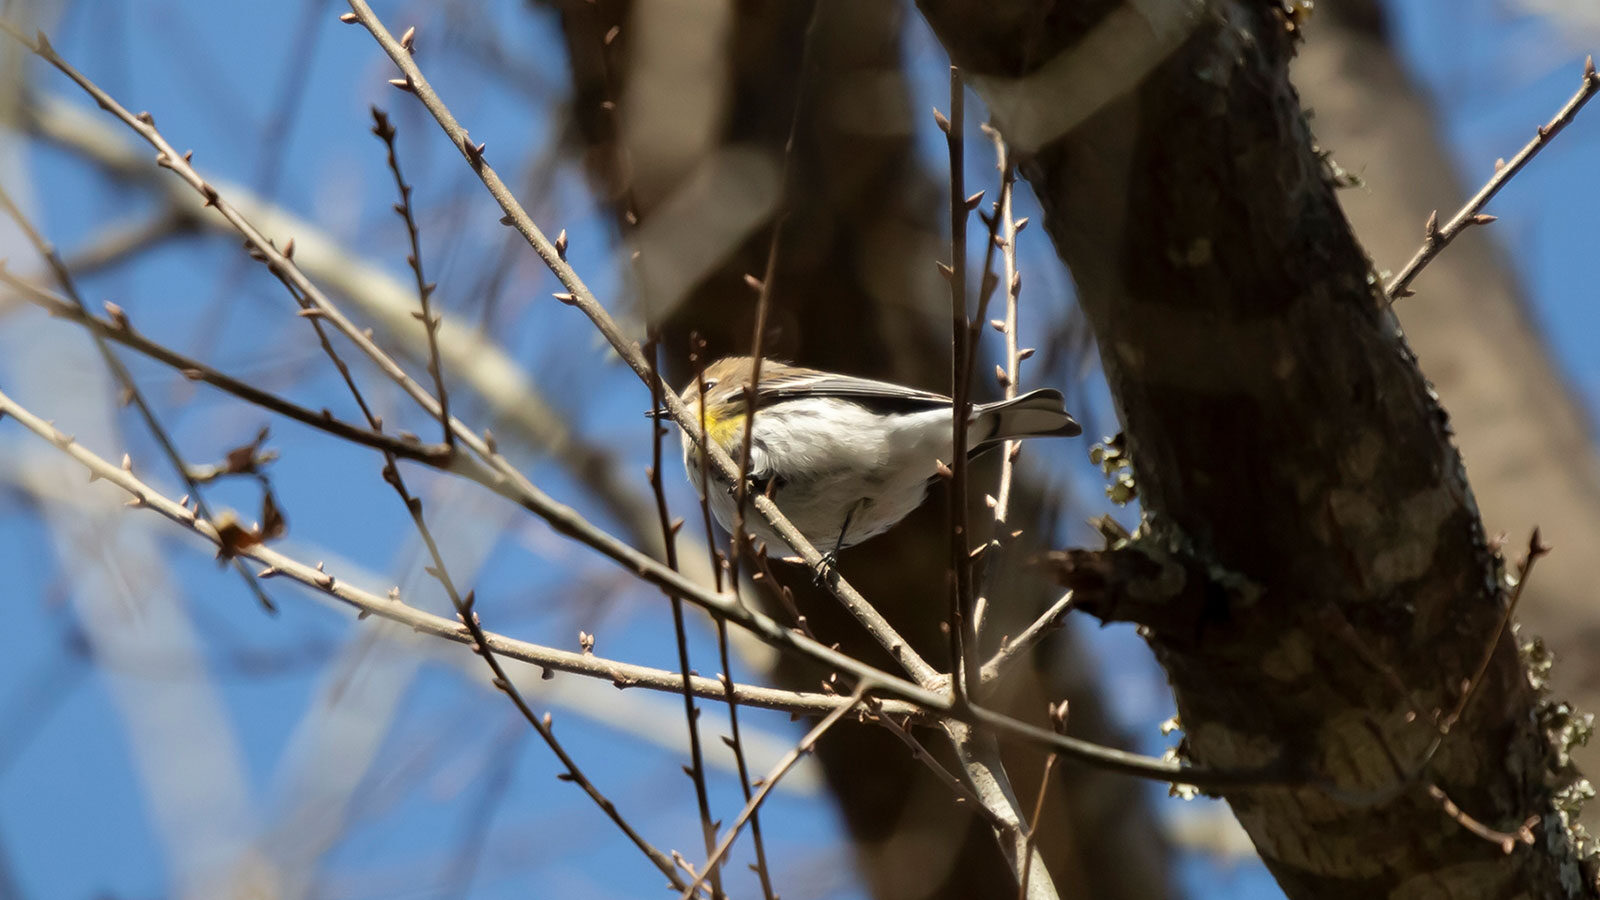 Yellow-rumped warbler perched on a branch